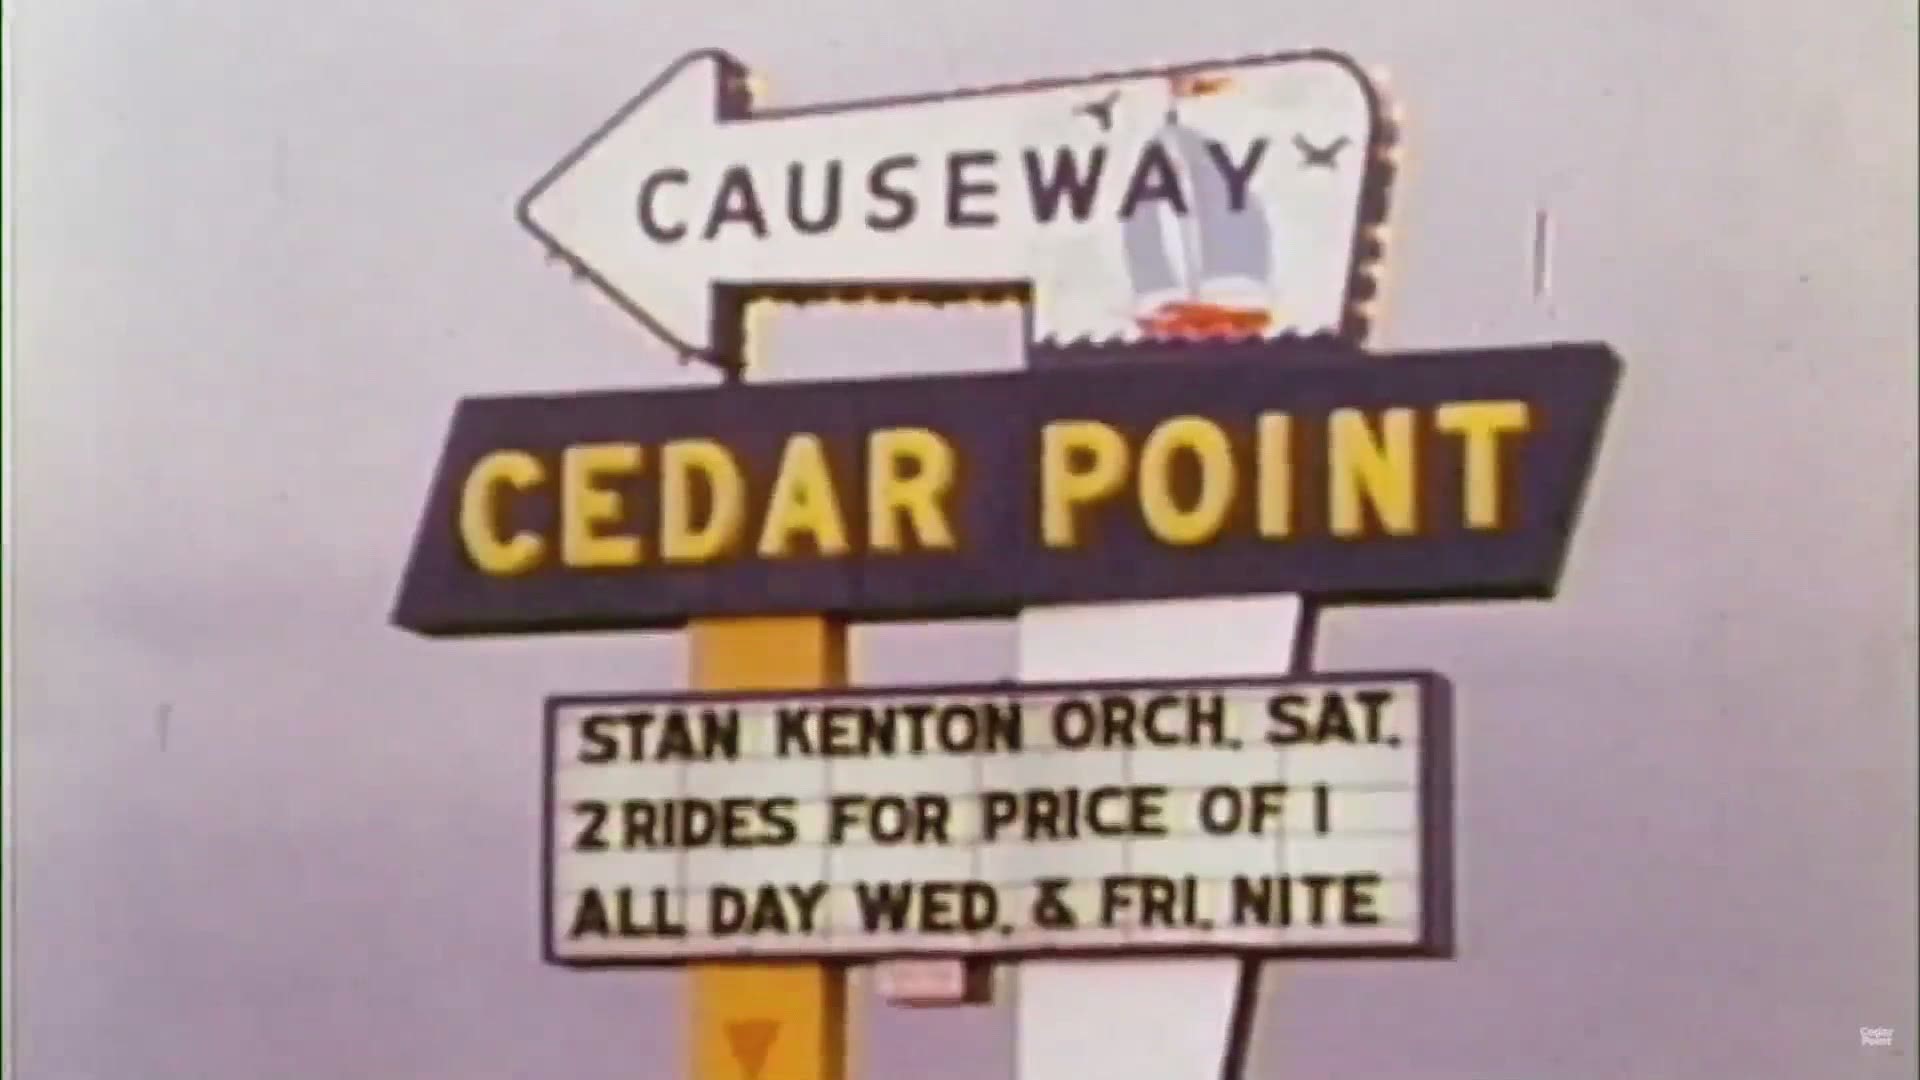 Cedar Point is reaching a milestone in 2020 with its 150th anniversary. The park is celebrating by honoring Cedar Point's storied legacy.